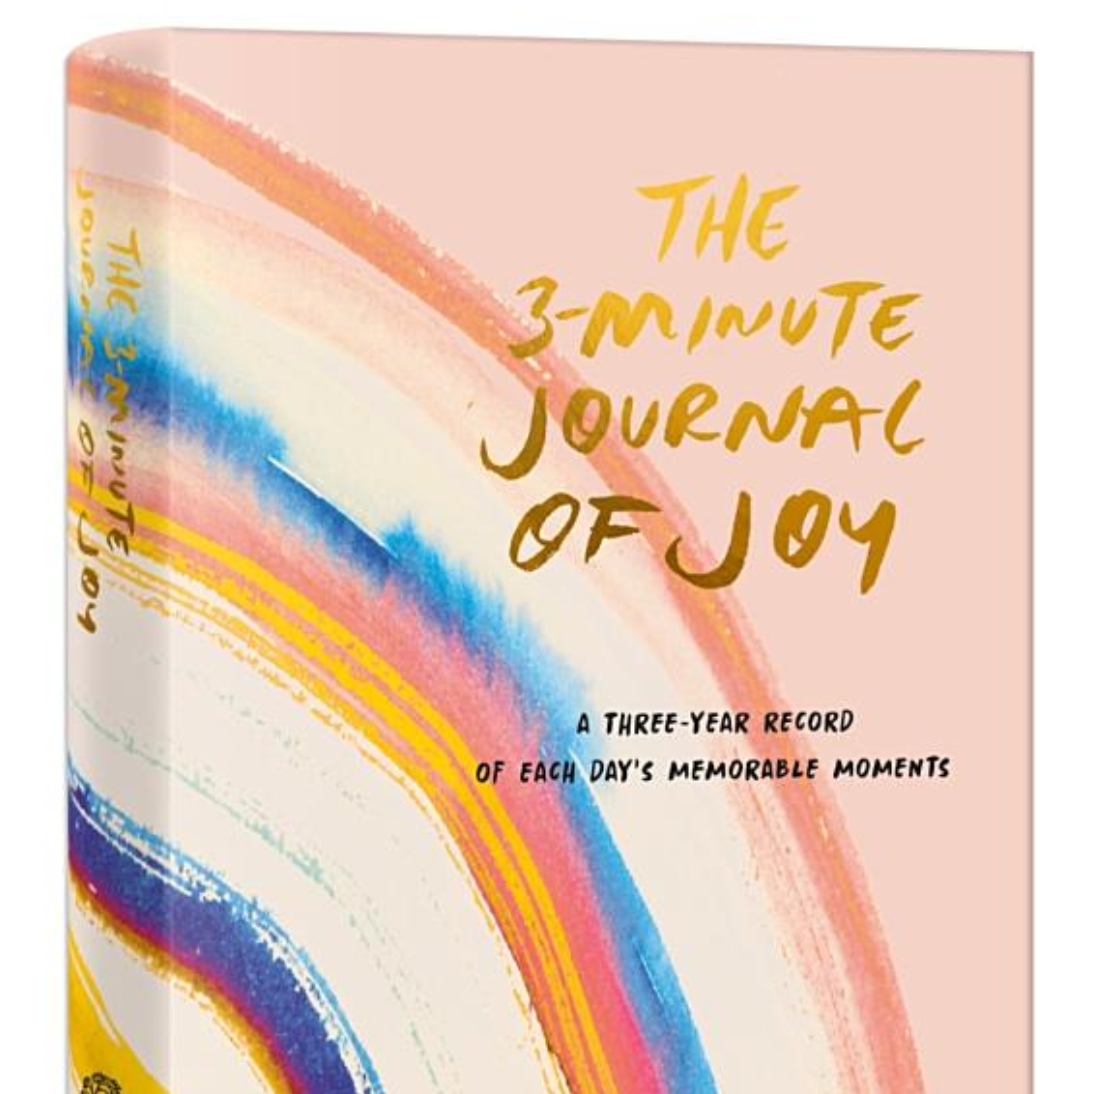 The 3-Minute Journal of Joy: A Three-Year Record of Each Day's Memorable Mo